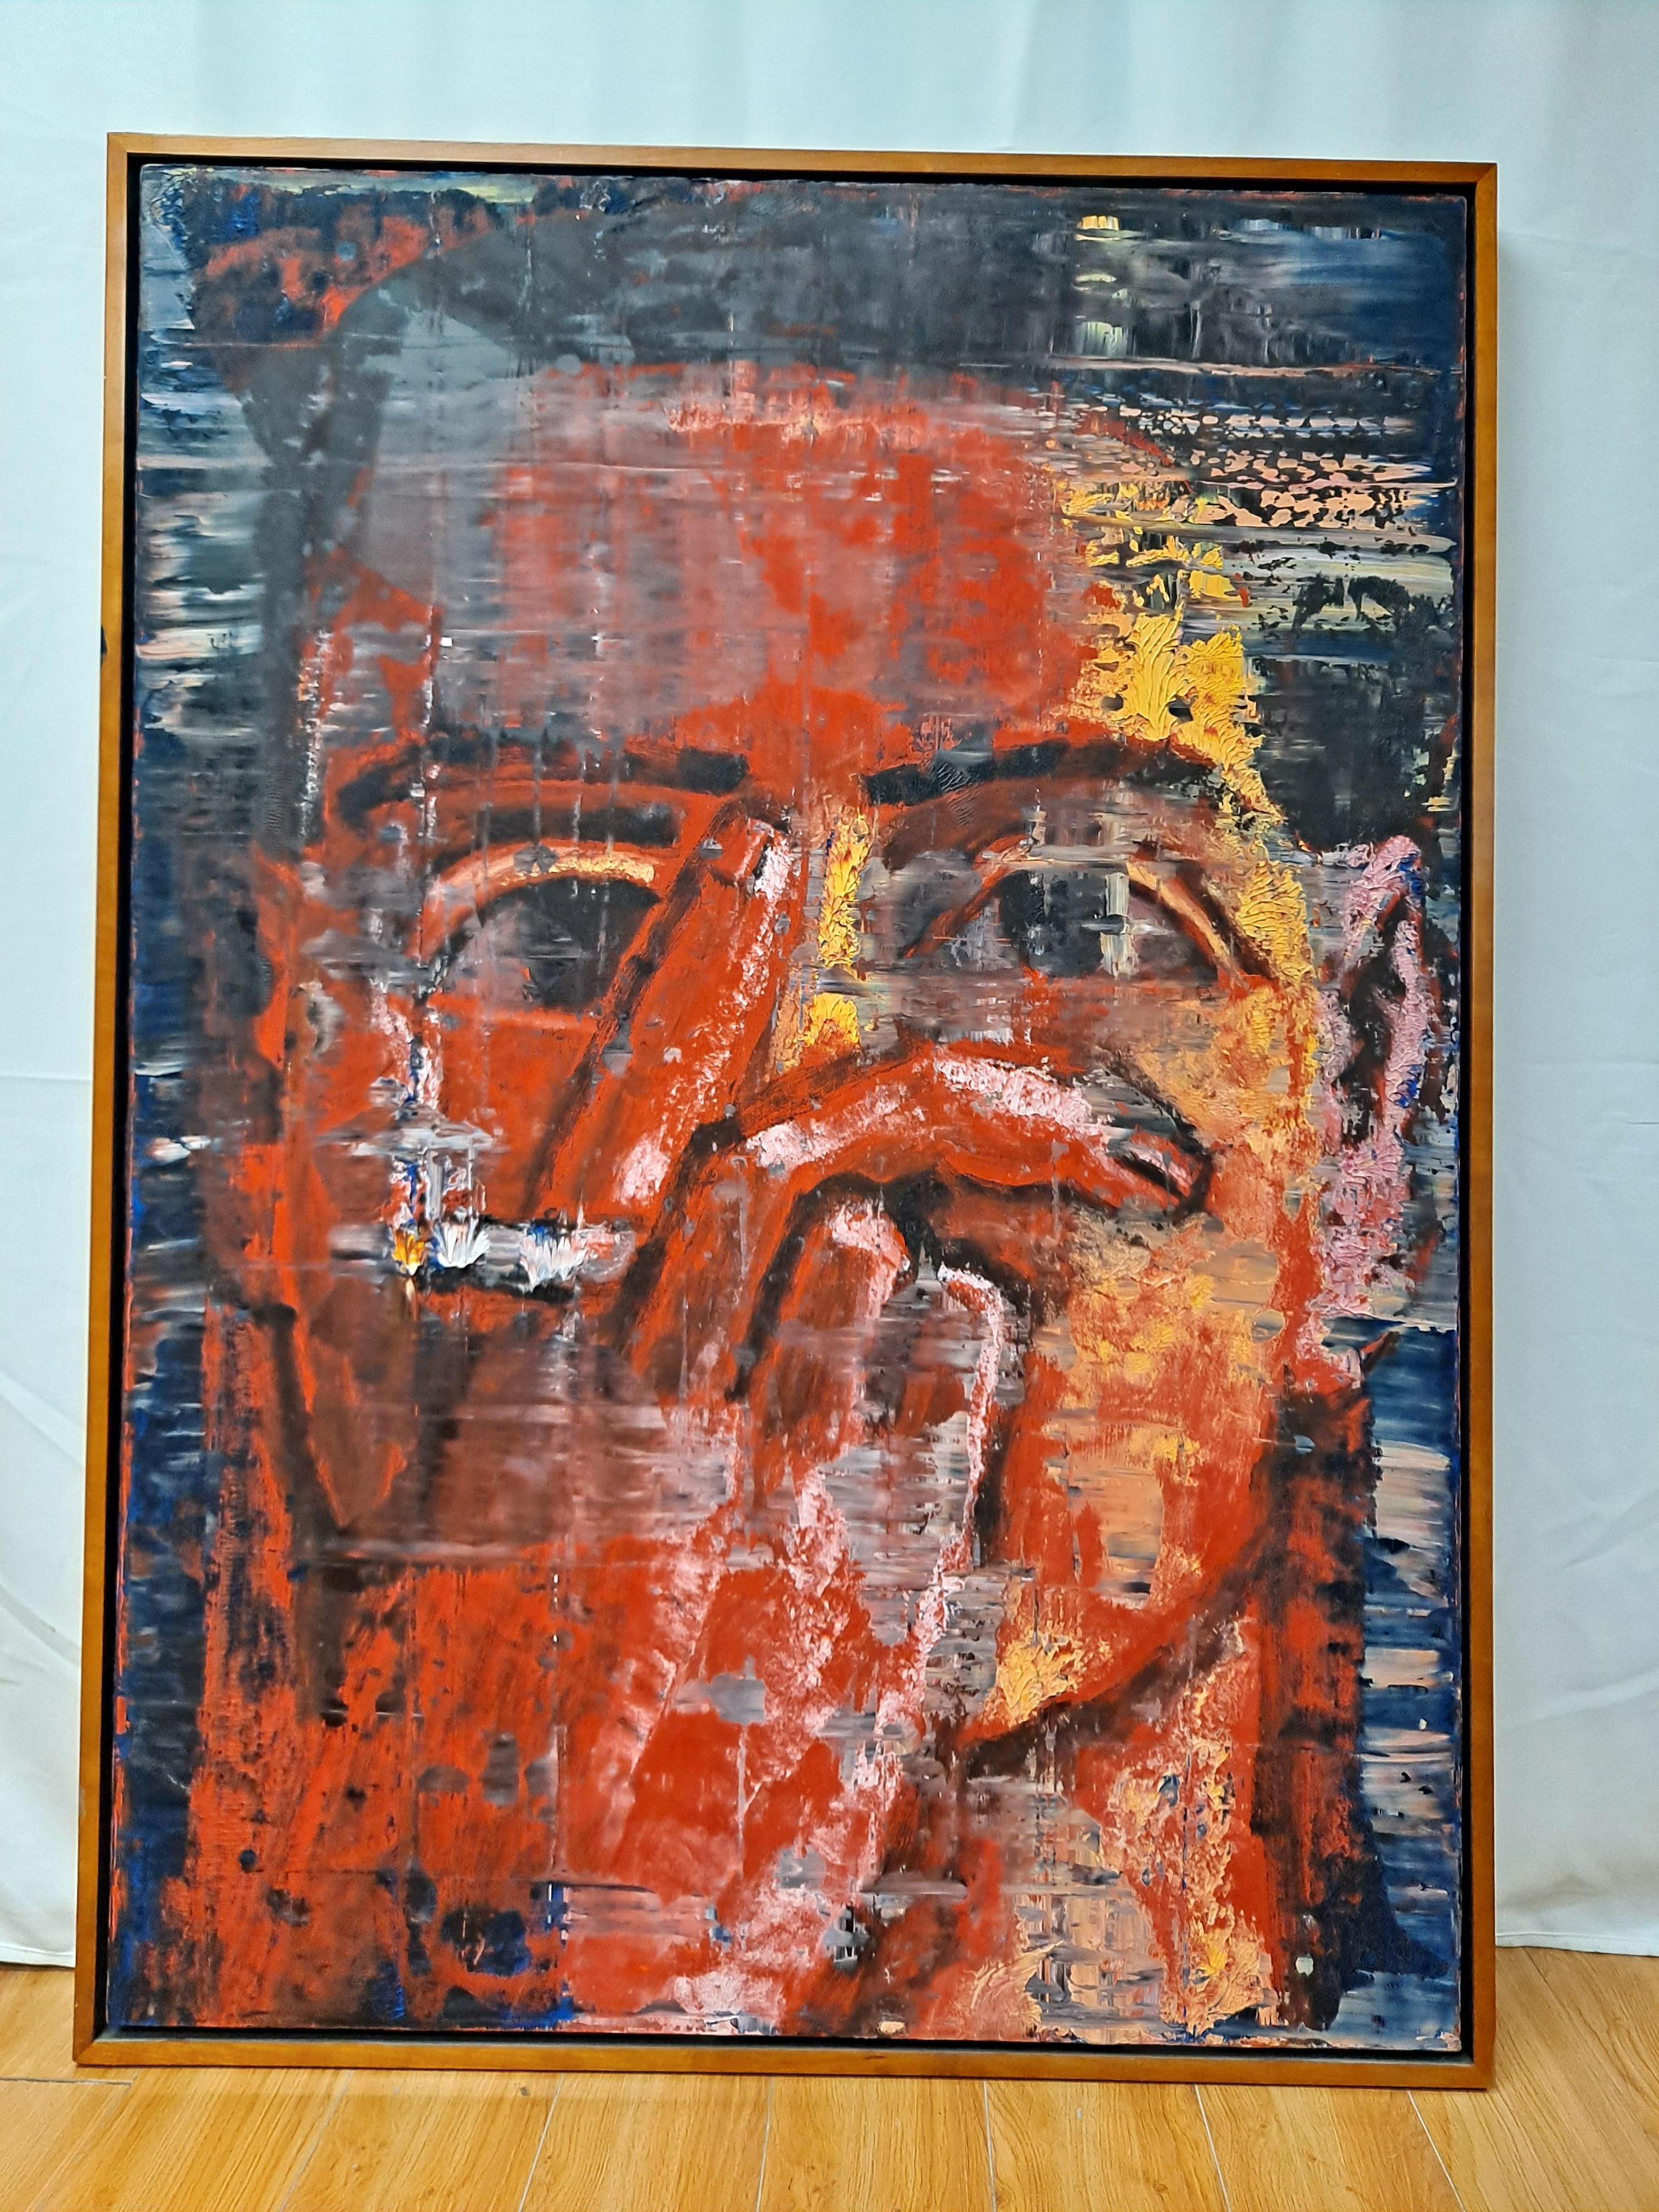 Aaron Fink (American 1955-Active) "Red Smoker" Oil Paint on Canvas

1986